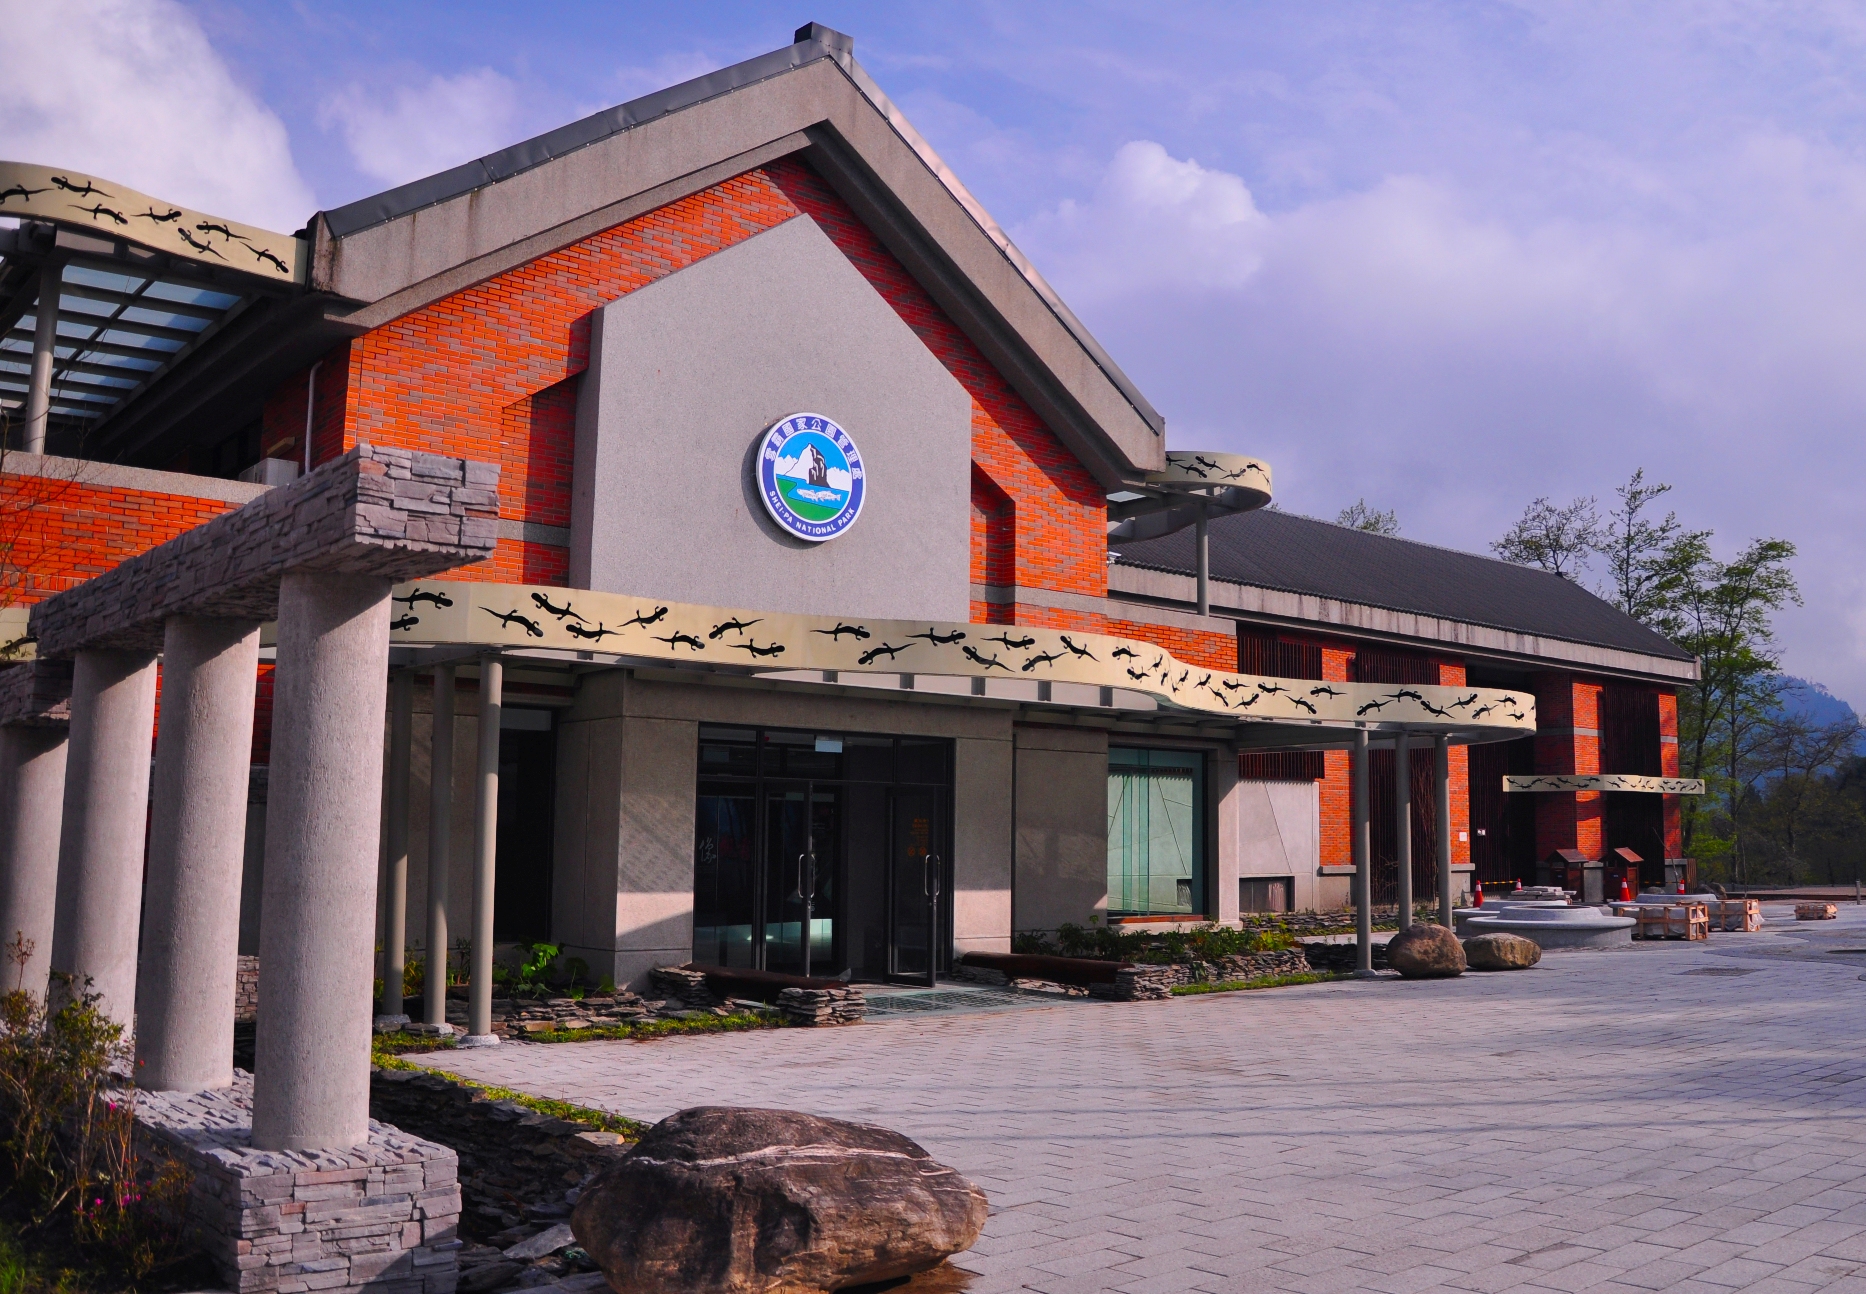 the well-equipped Guanwu Salamander Ecological Center